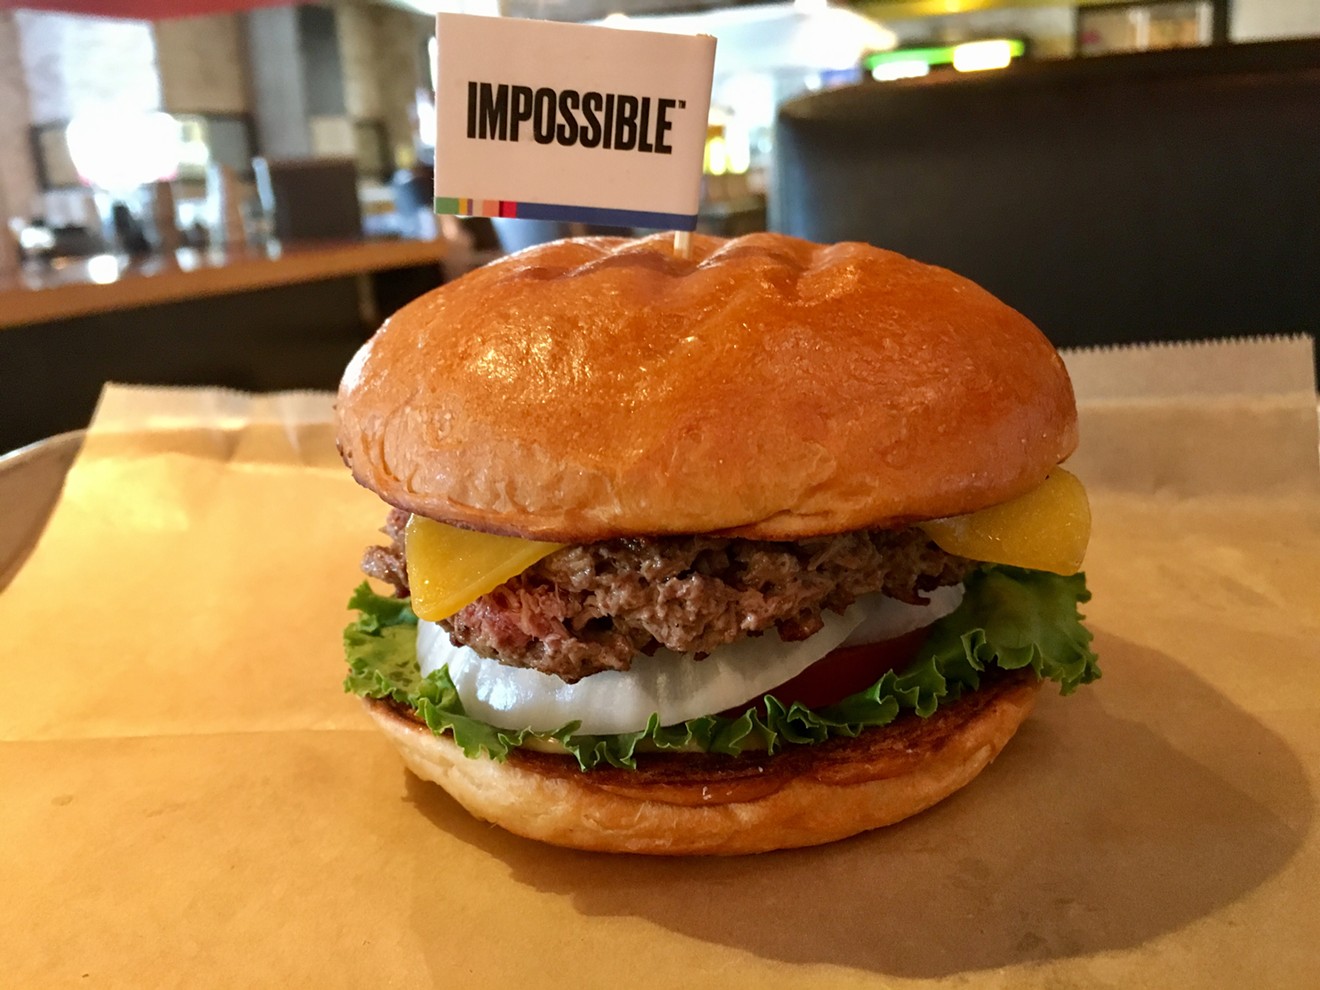 Hopdoddy's Impossible Burger uses an Impossible Foods patty, Tillamook cheddar, green leaf lettuce, white onion, tomatoes and “Sassy Sauce” on a brioche bun.